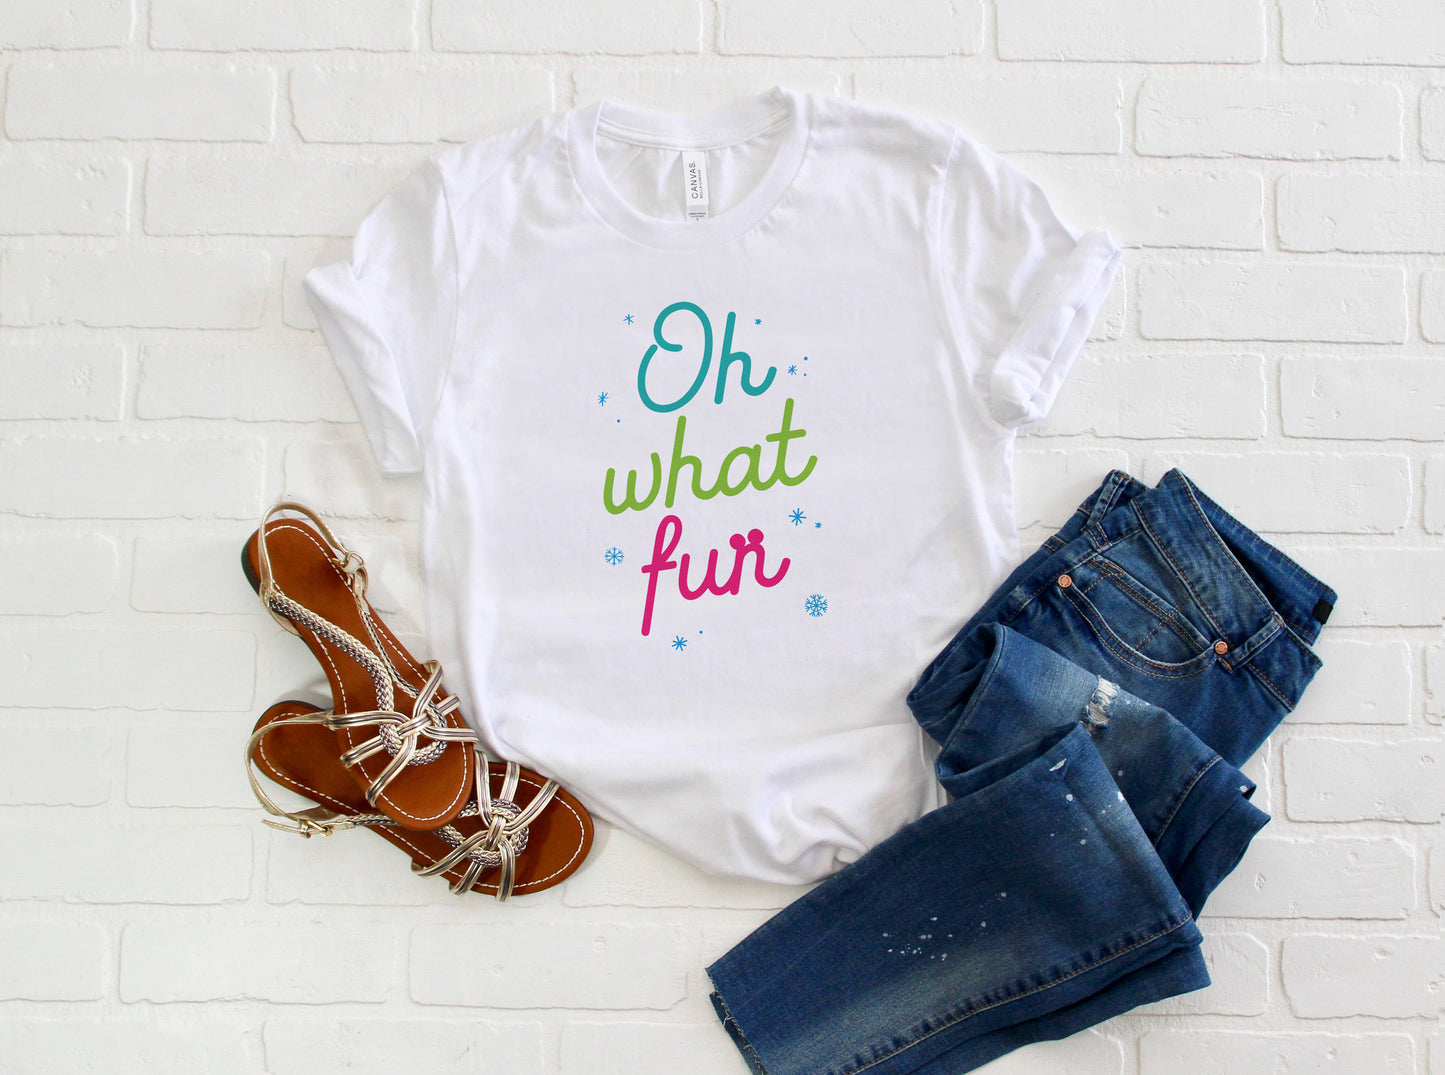 Christmas Oh What Fun Colorful Short-Sleeve Unisex T-Shirt - Next Stop Main Street